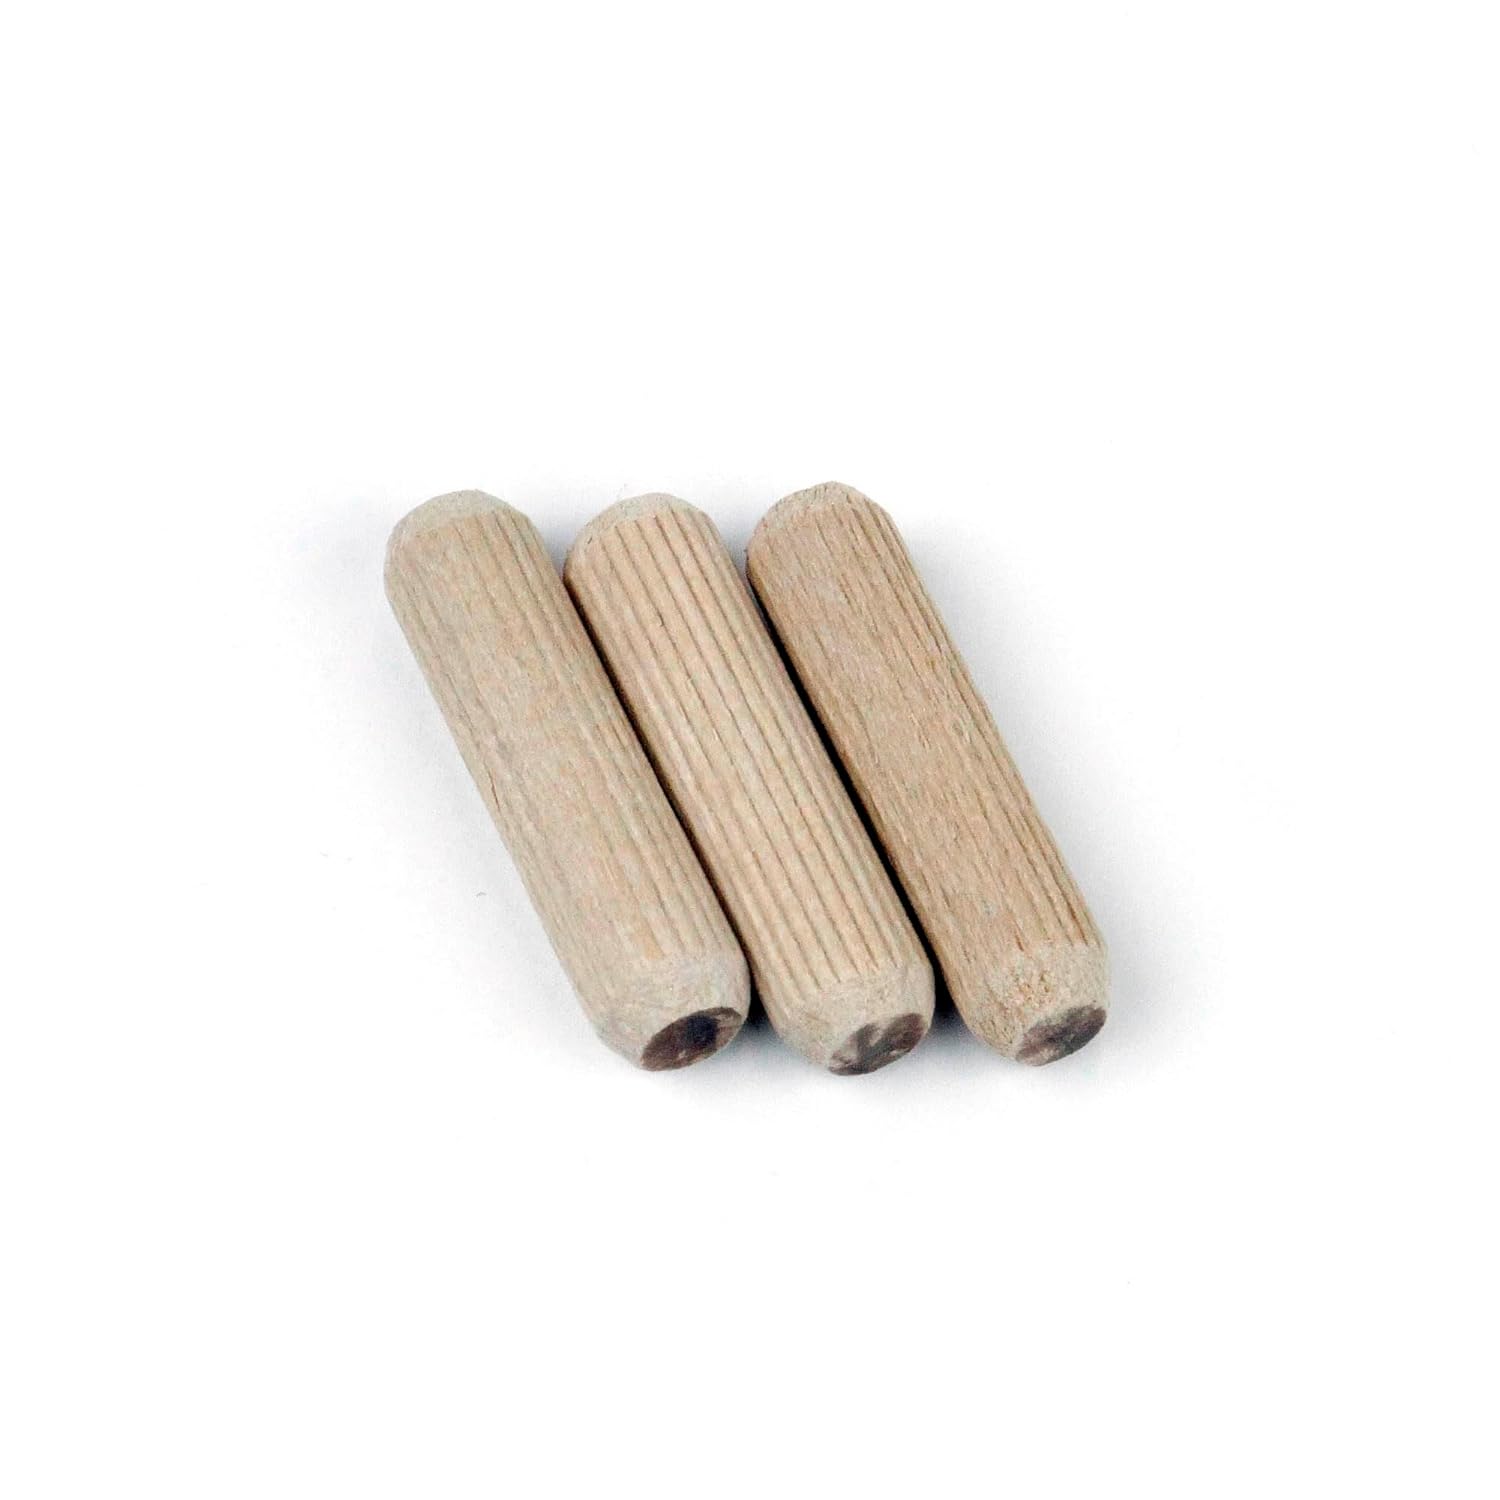 Wood Dowel Pins, Fluted | Easier Insertion Straight Grooved Pins, Craft, DIY, Carpentry (Beech)